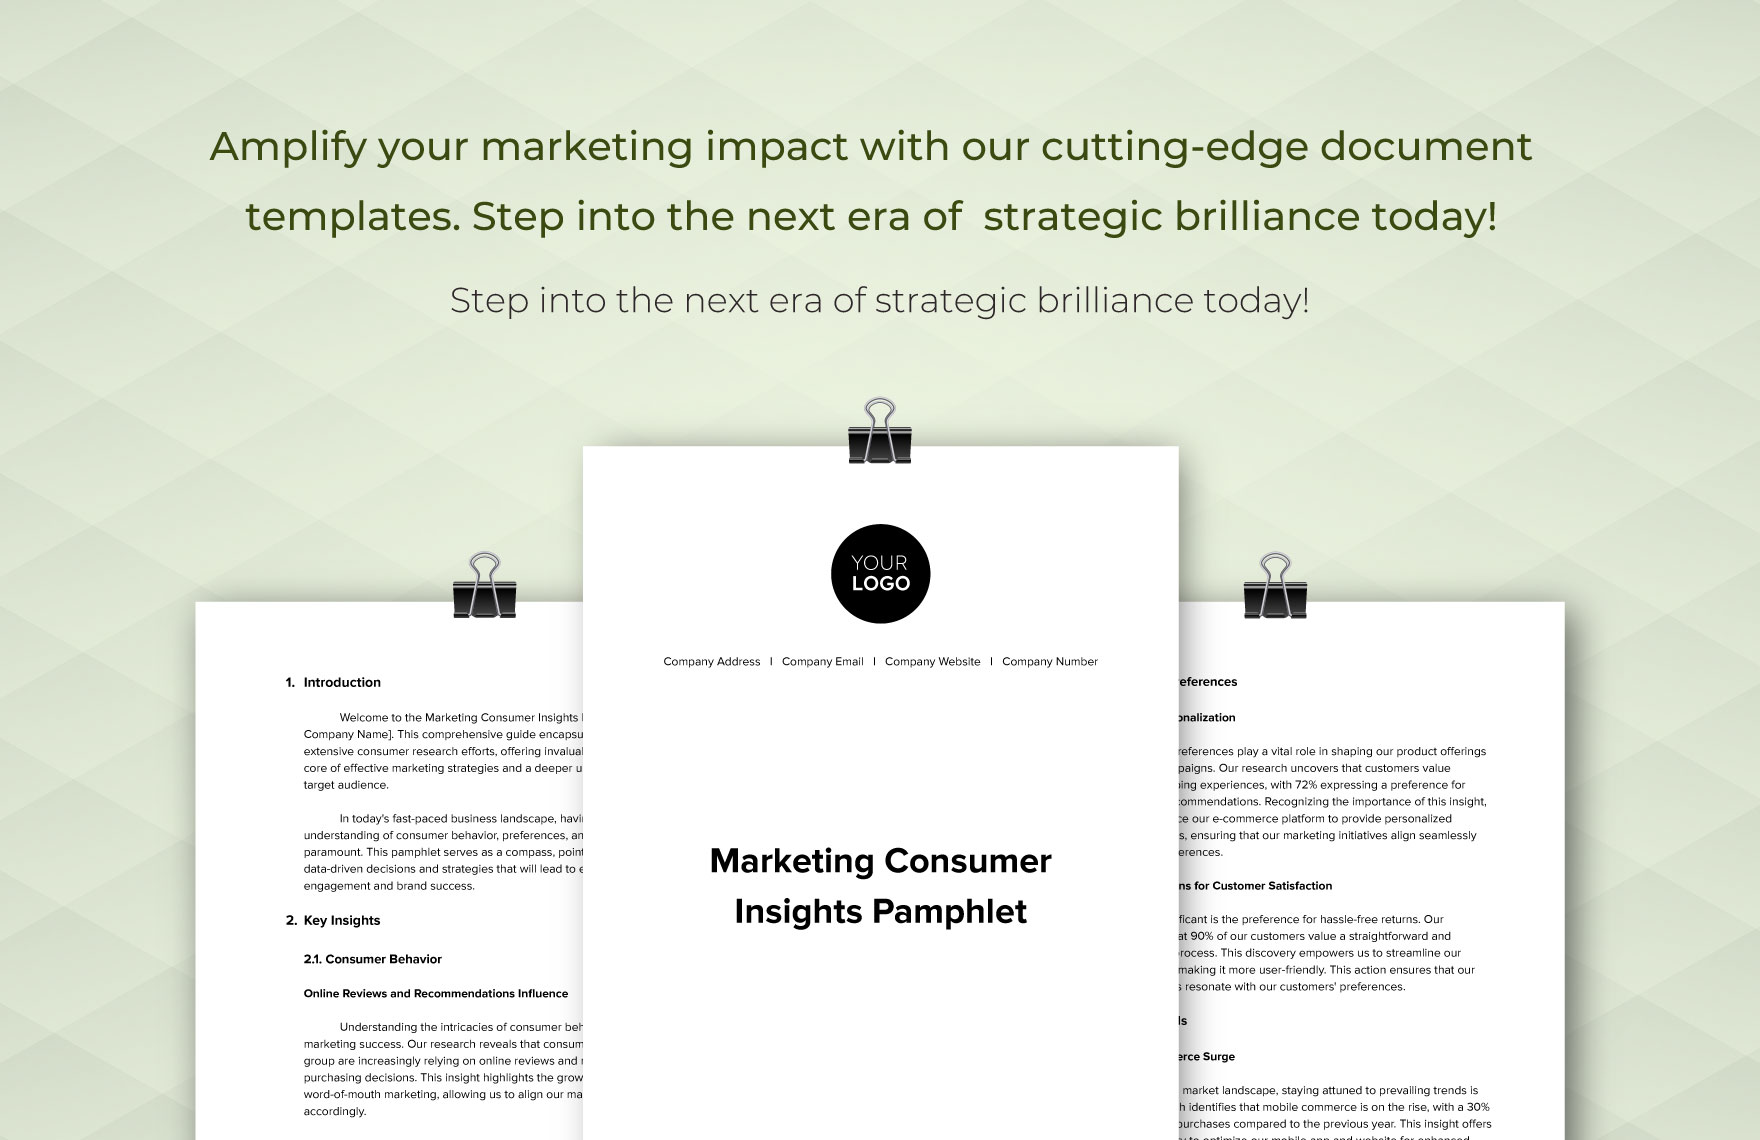 Marketing Consumer Insights Pamphlet Template